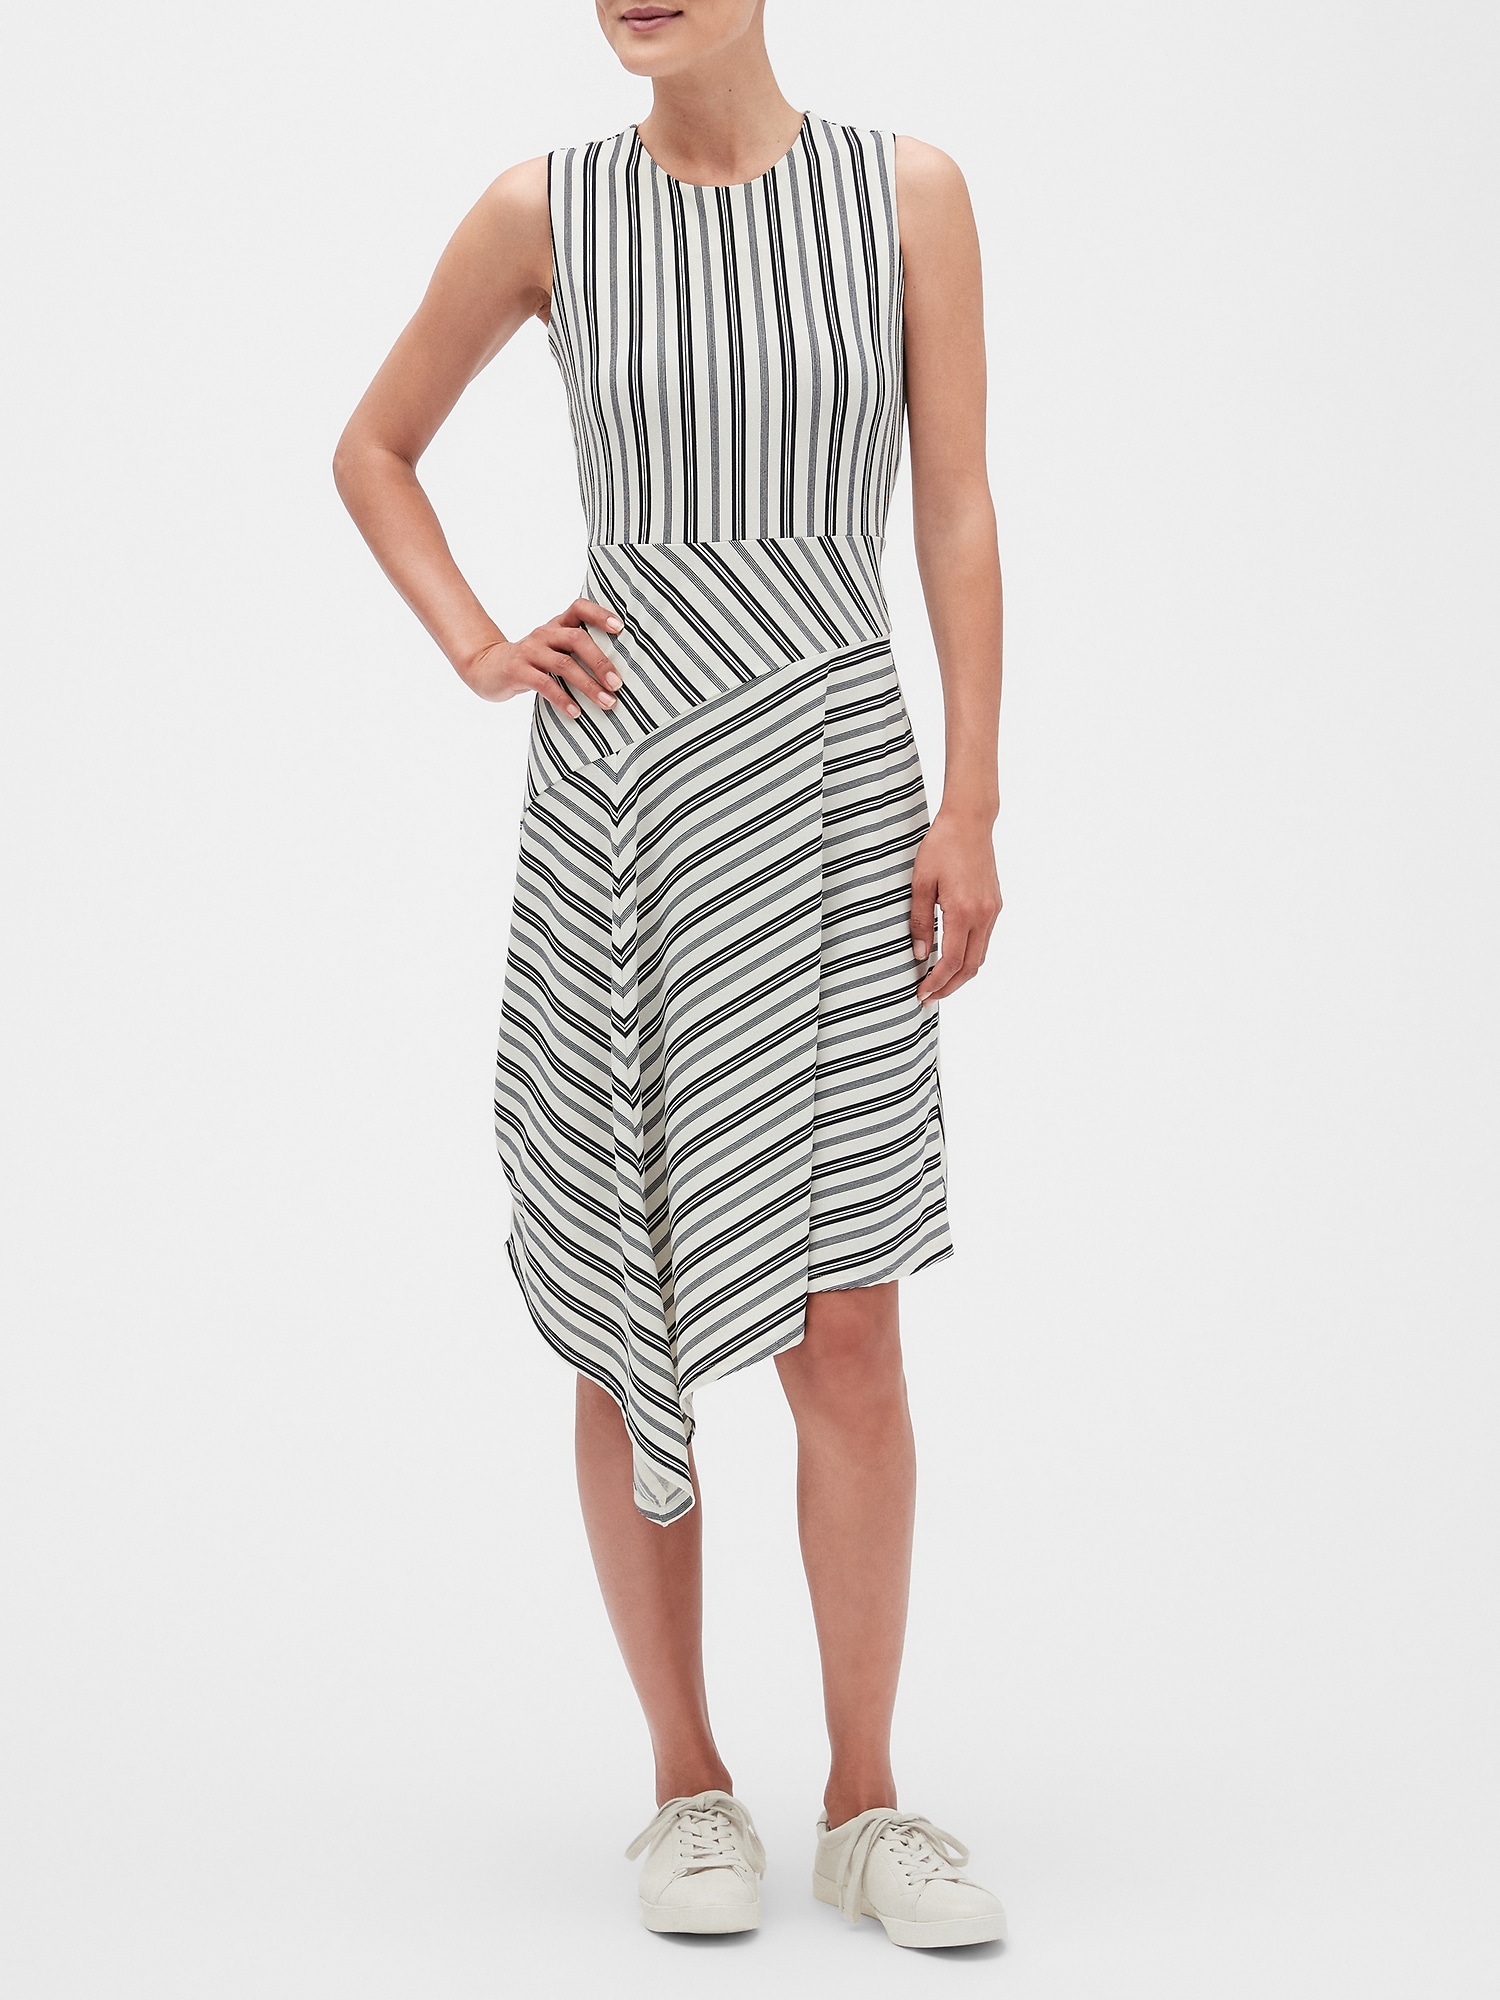 Stripe Asymmetrical Fit and Flare Dress